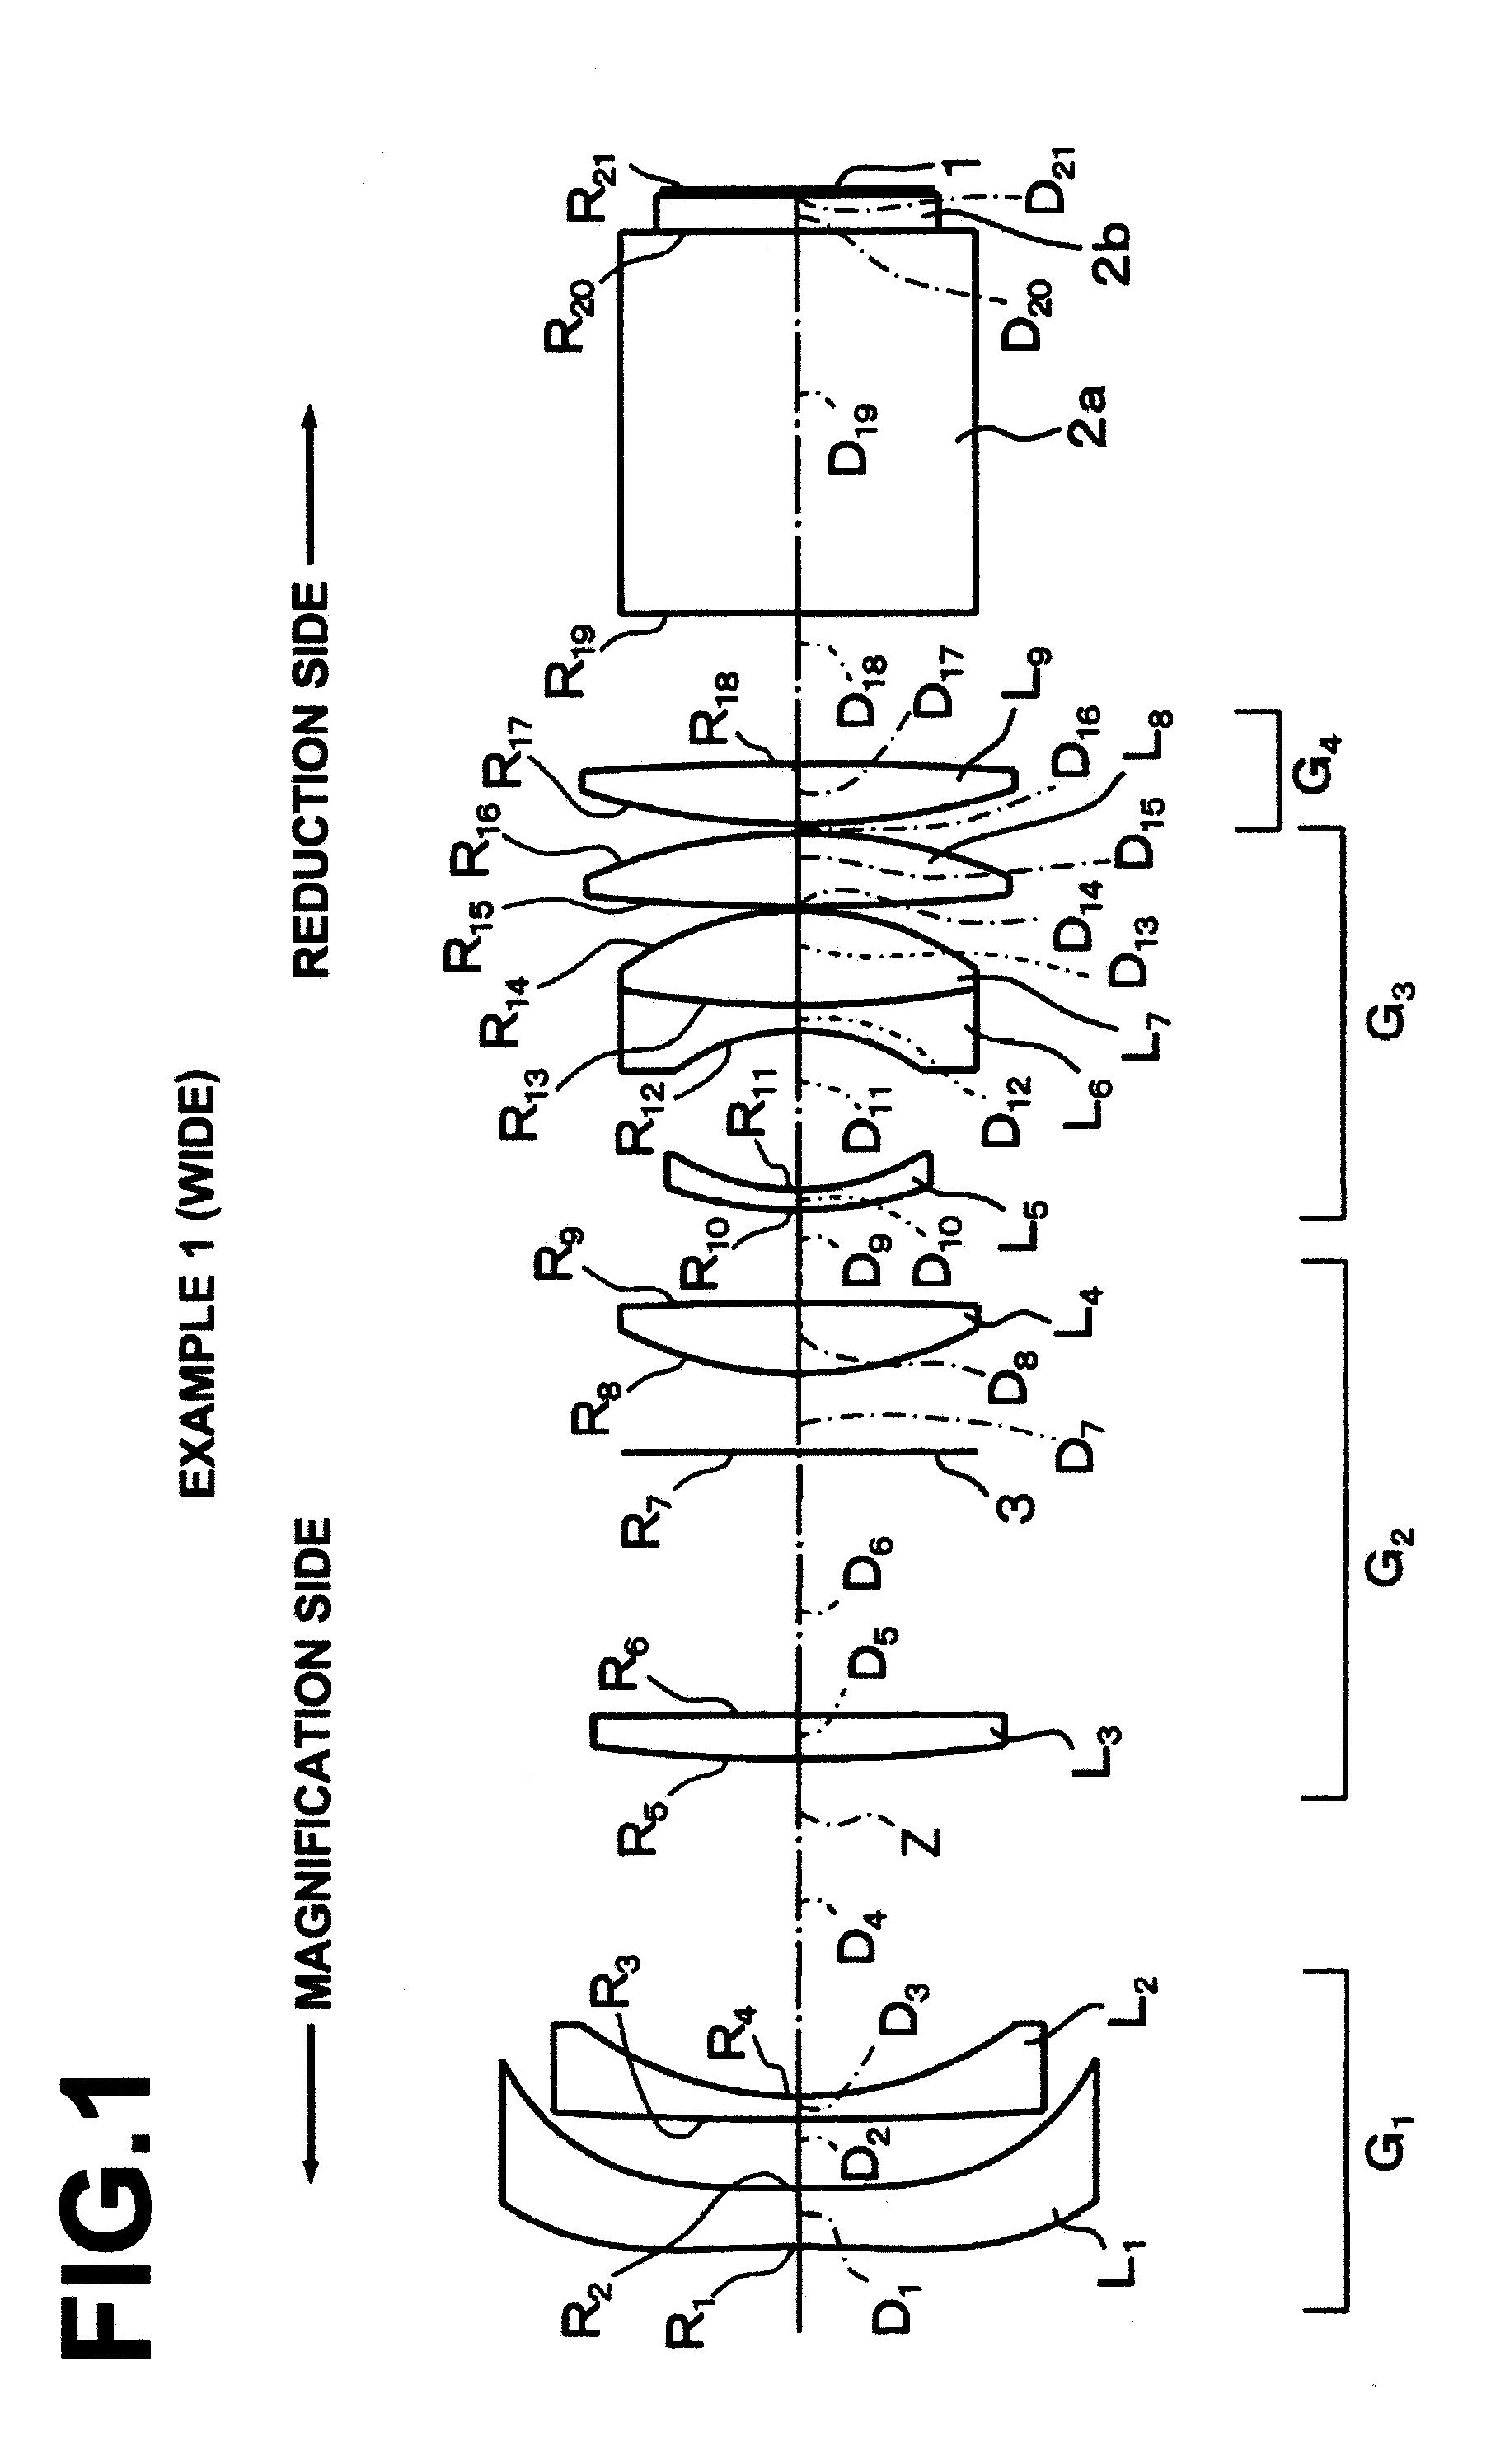 Zoom lens for projection and projection-type display apparatus